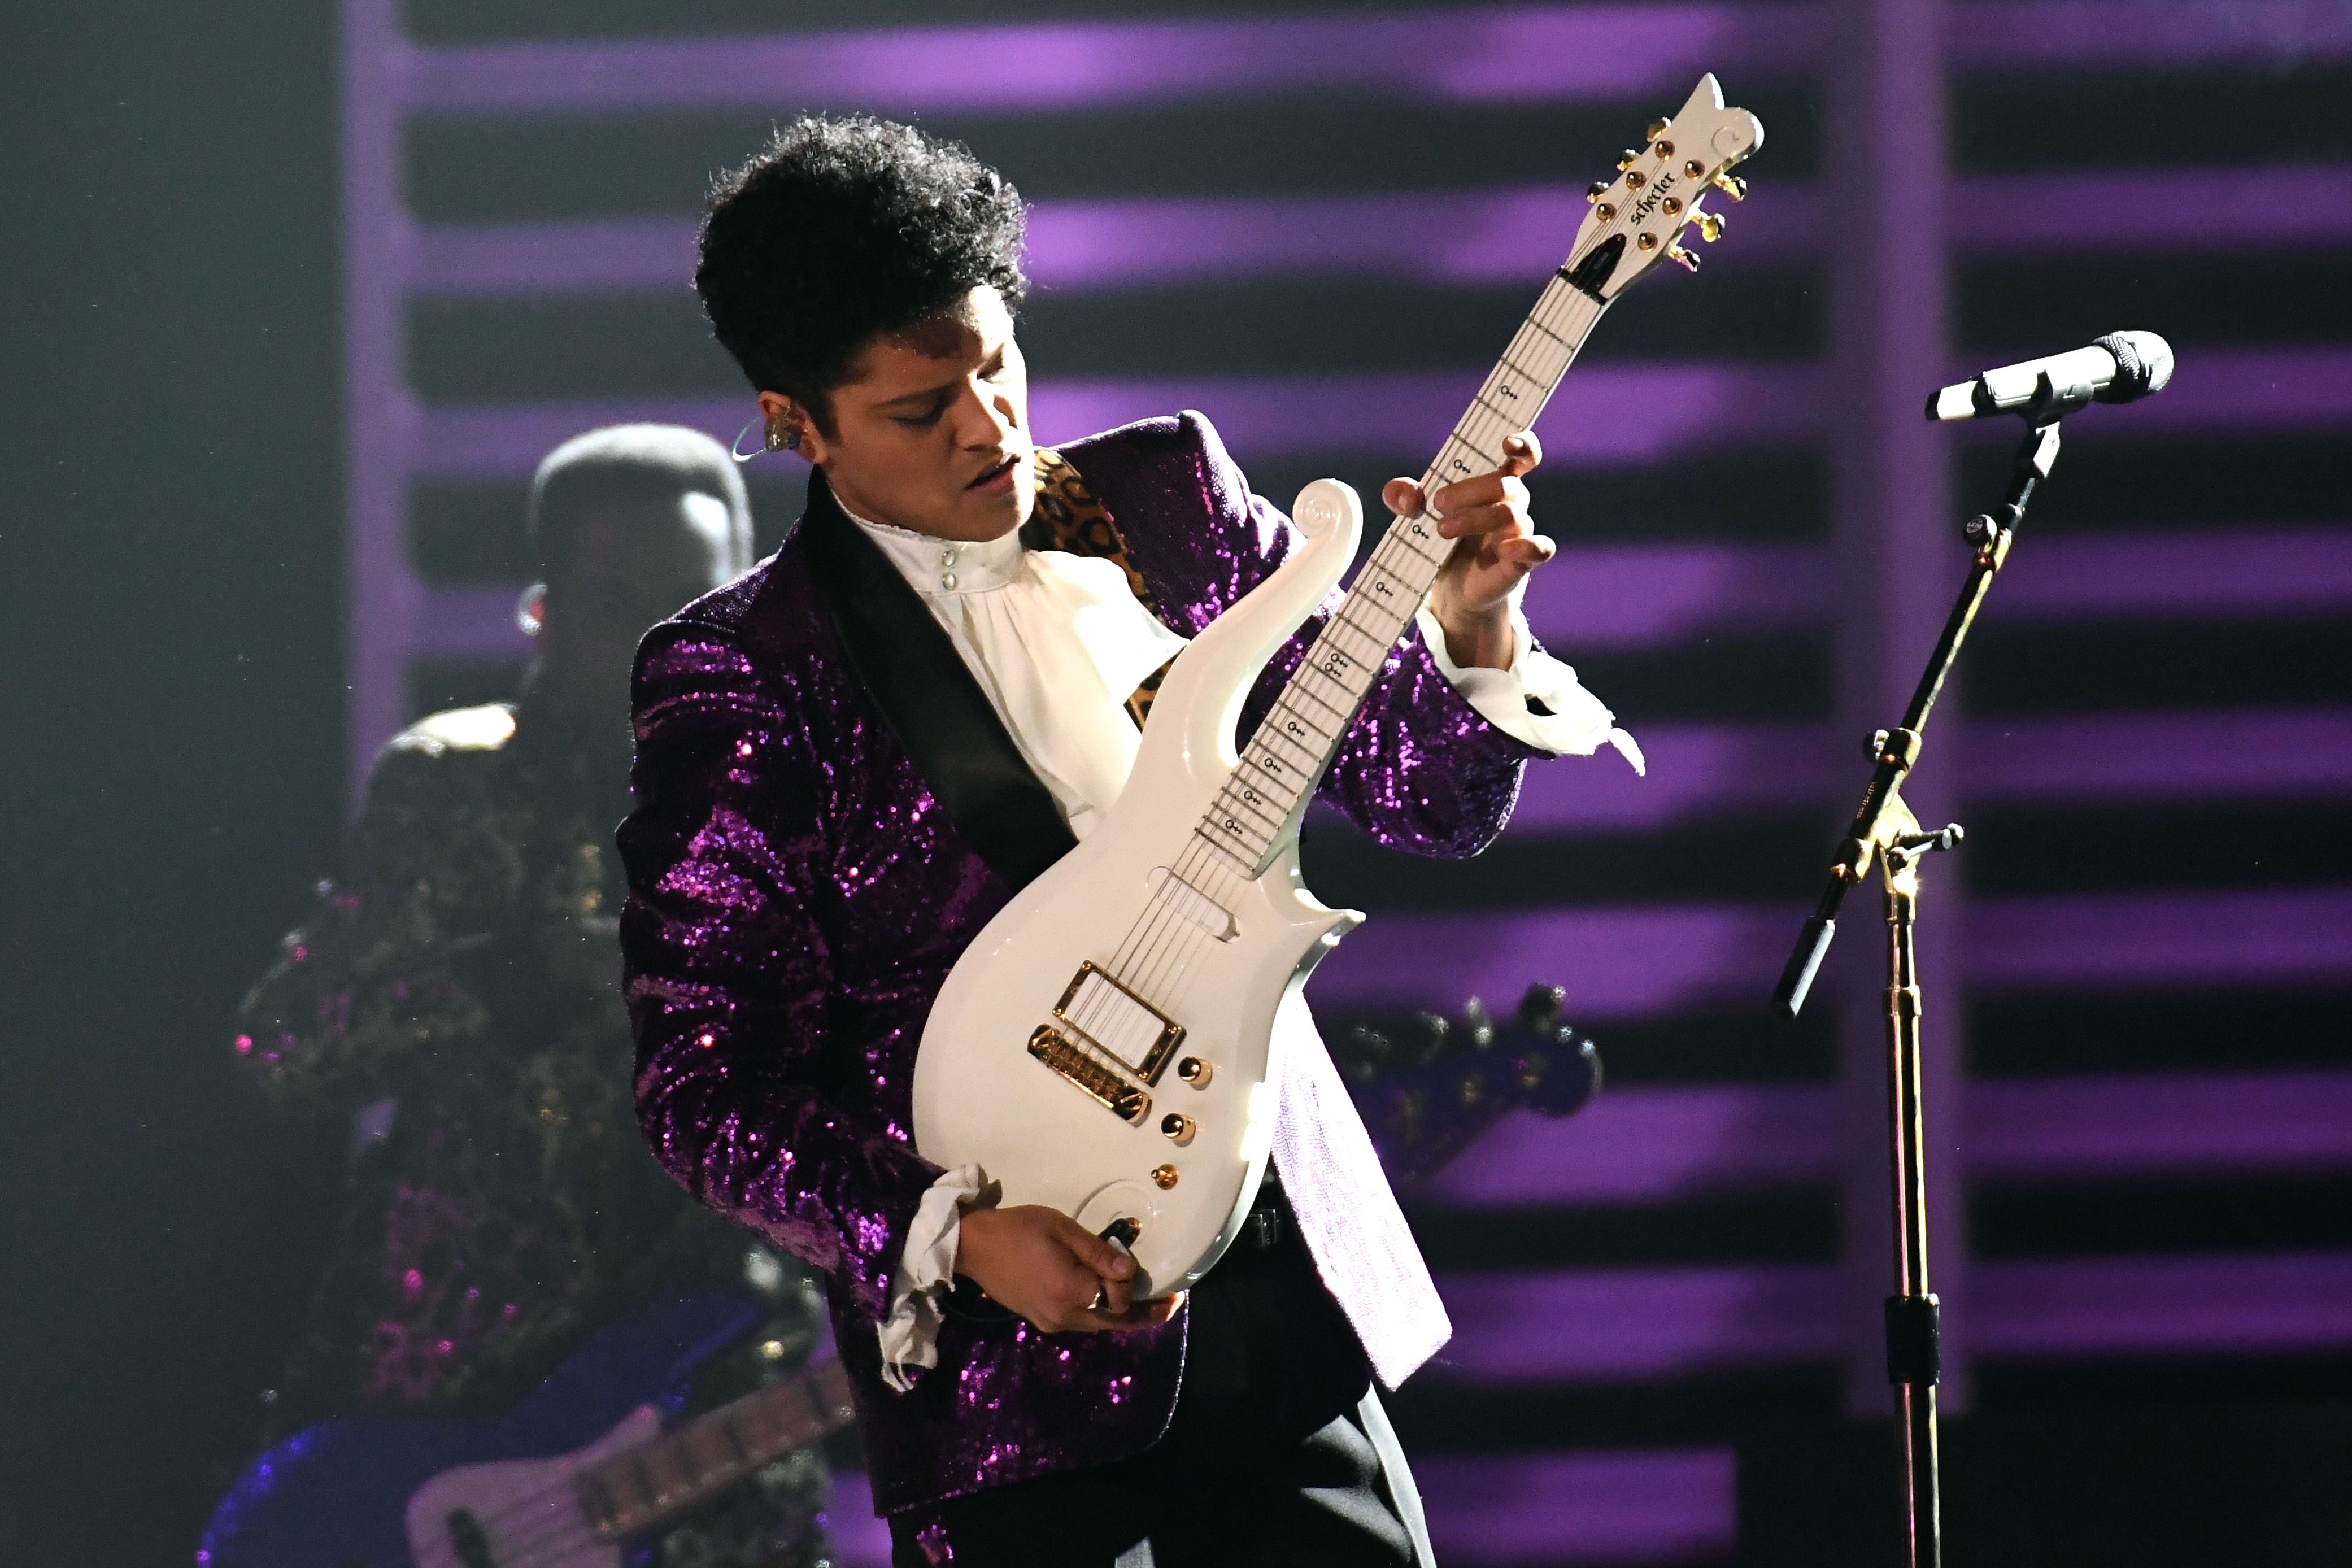 Bruno Mars performs a tribute to Prince during The GRAMMY Awards on February 12, 2017. (Photo by Kevork Djansezian/Getty)